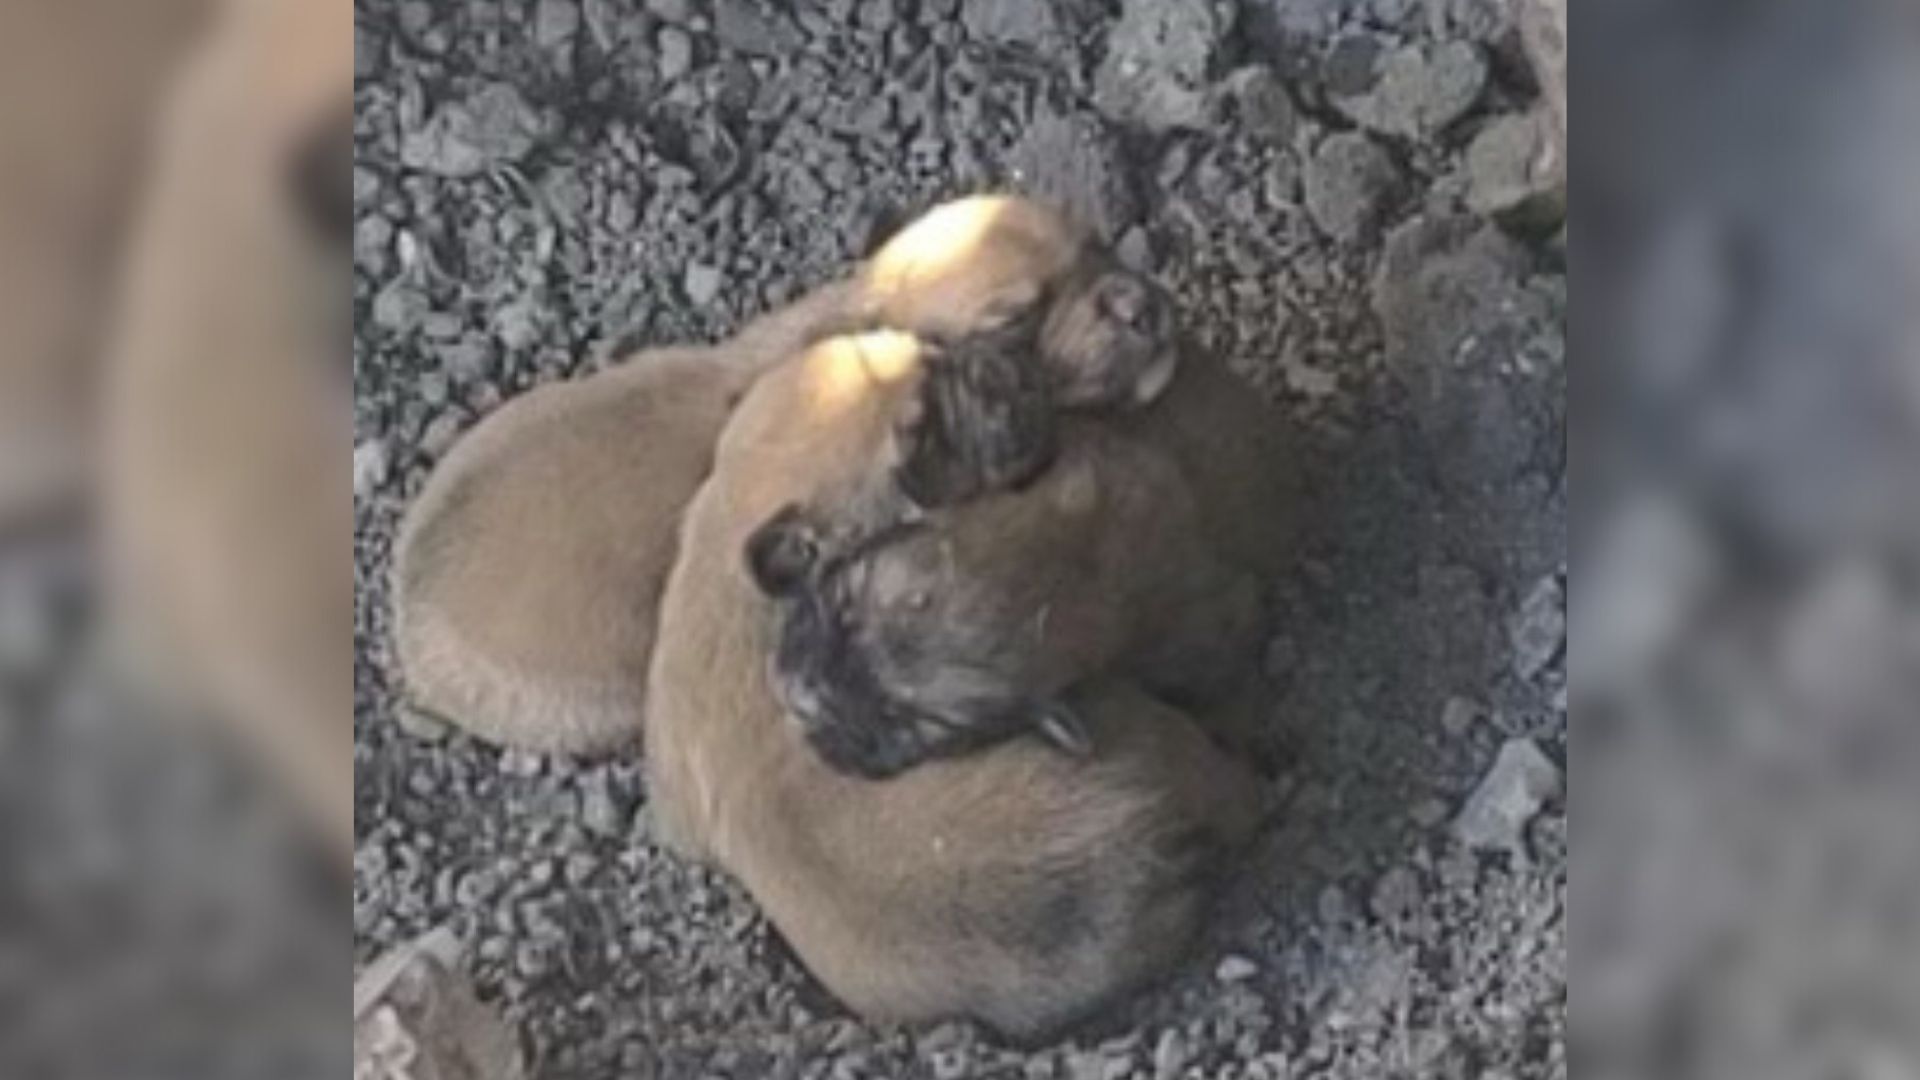 Rescuers Shocked To Find Puppies Hugging On ‘Frozen Ground’ To Protect Themselves From The Cold